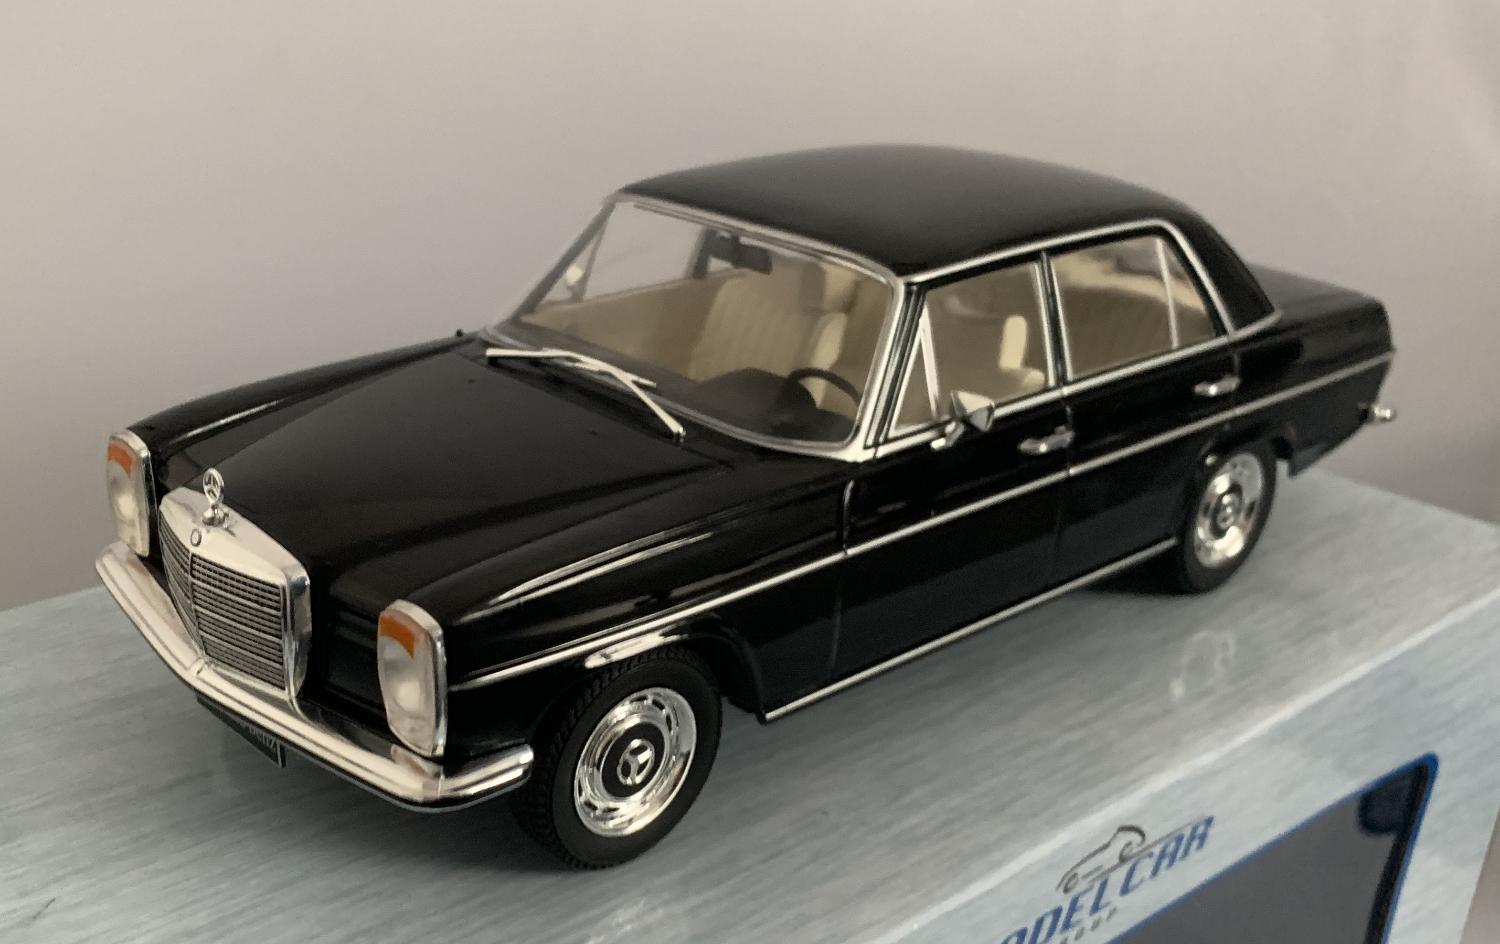 An excellent scale model of the Mercedes Benz 200 D with high level of detail throughout, all authentically recreated.